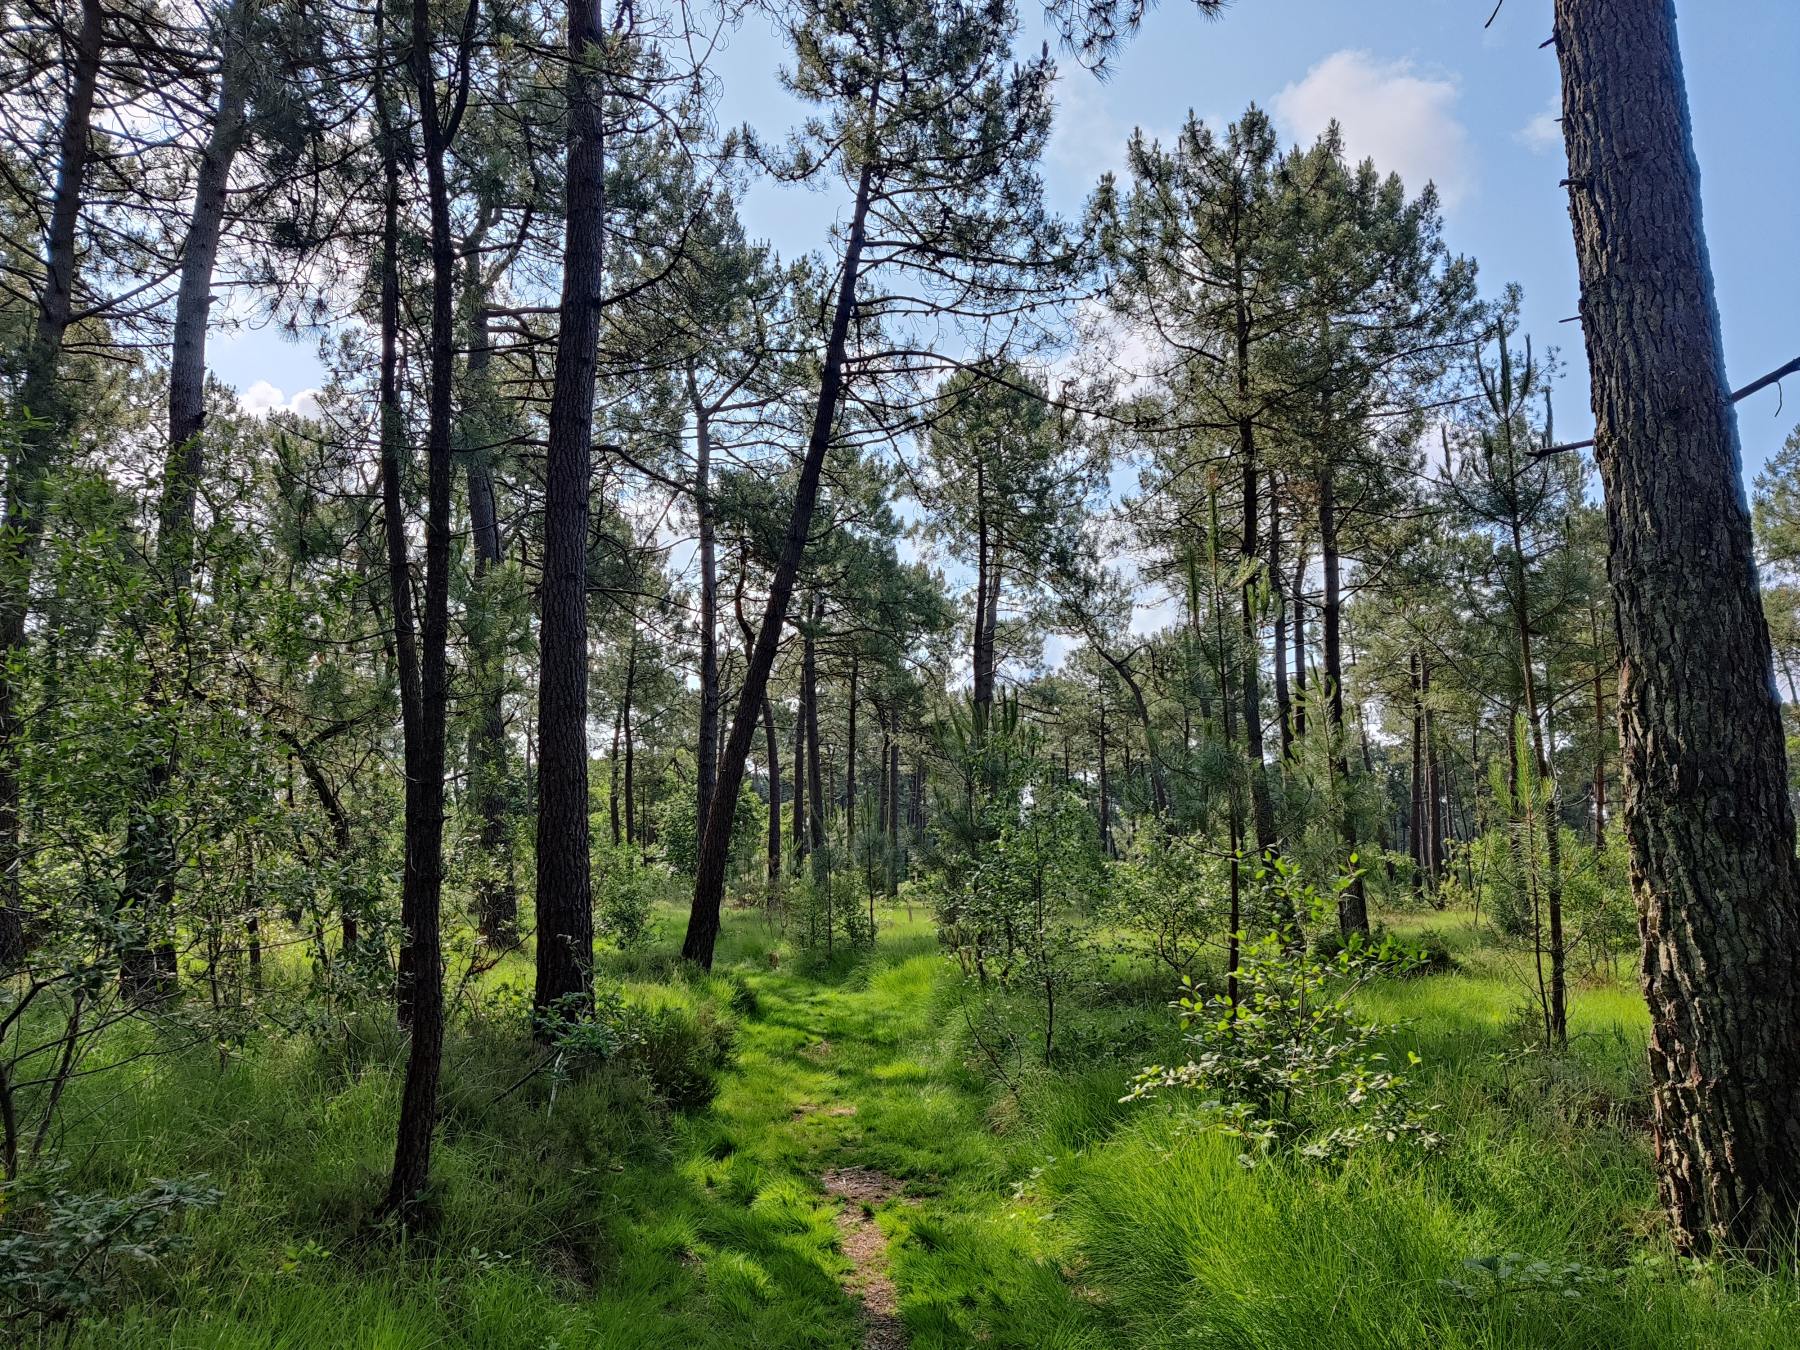 A forest with tall pine trees and a path leading through a grassy undergrowth